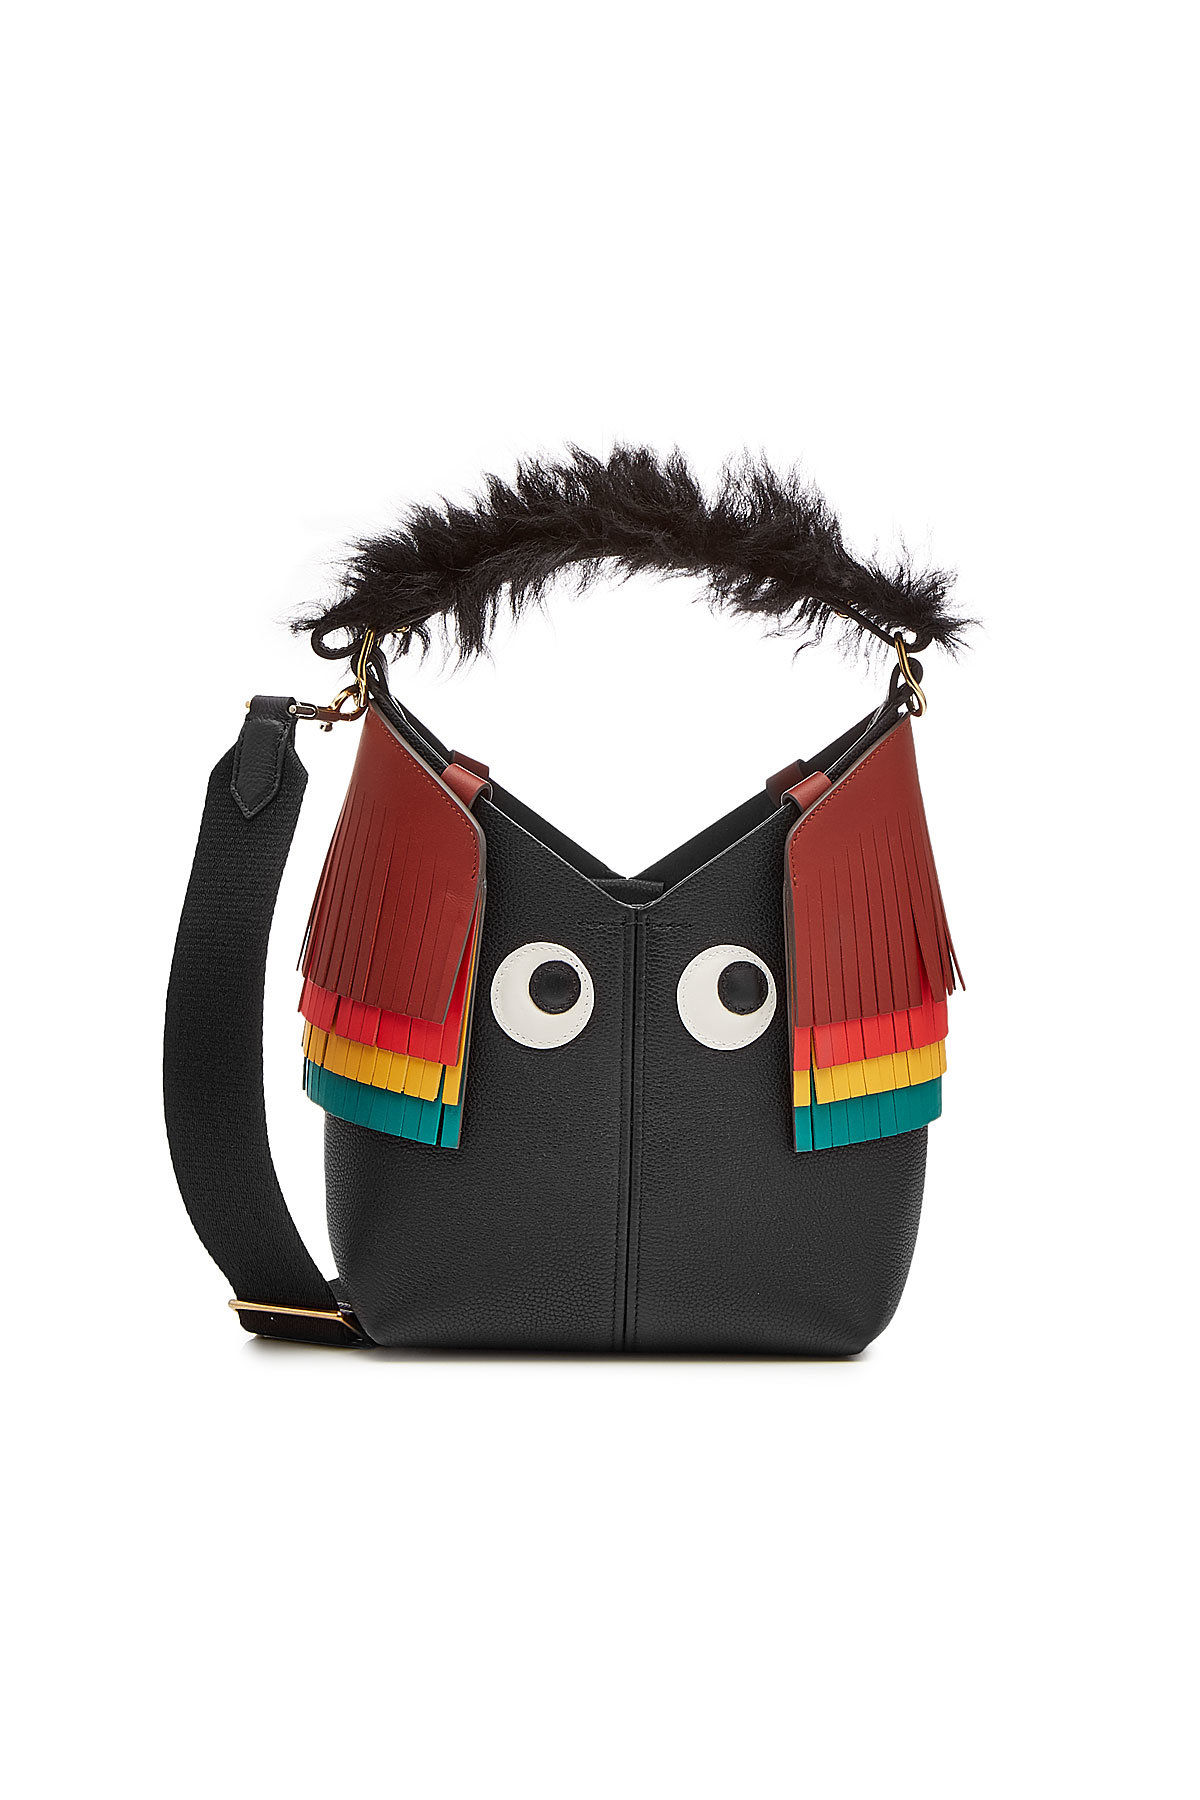 Anya Hindmarch - Mini Build A Bag Creature Leather Tote with Lamb Fur